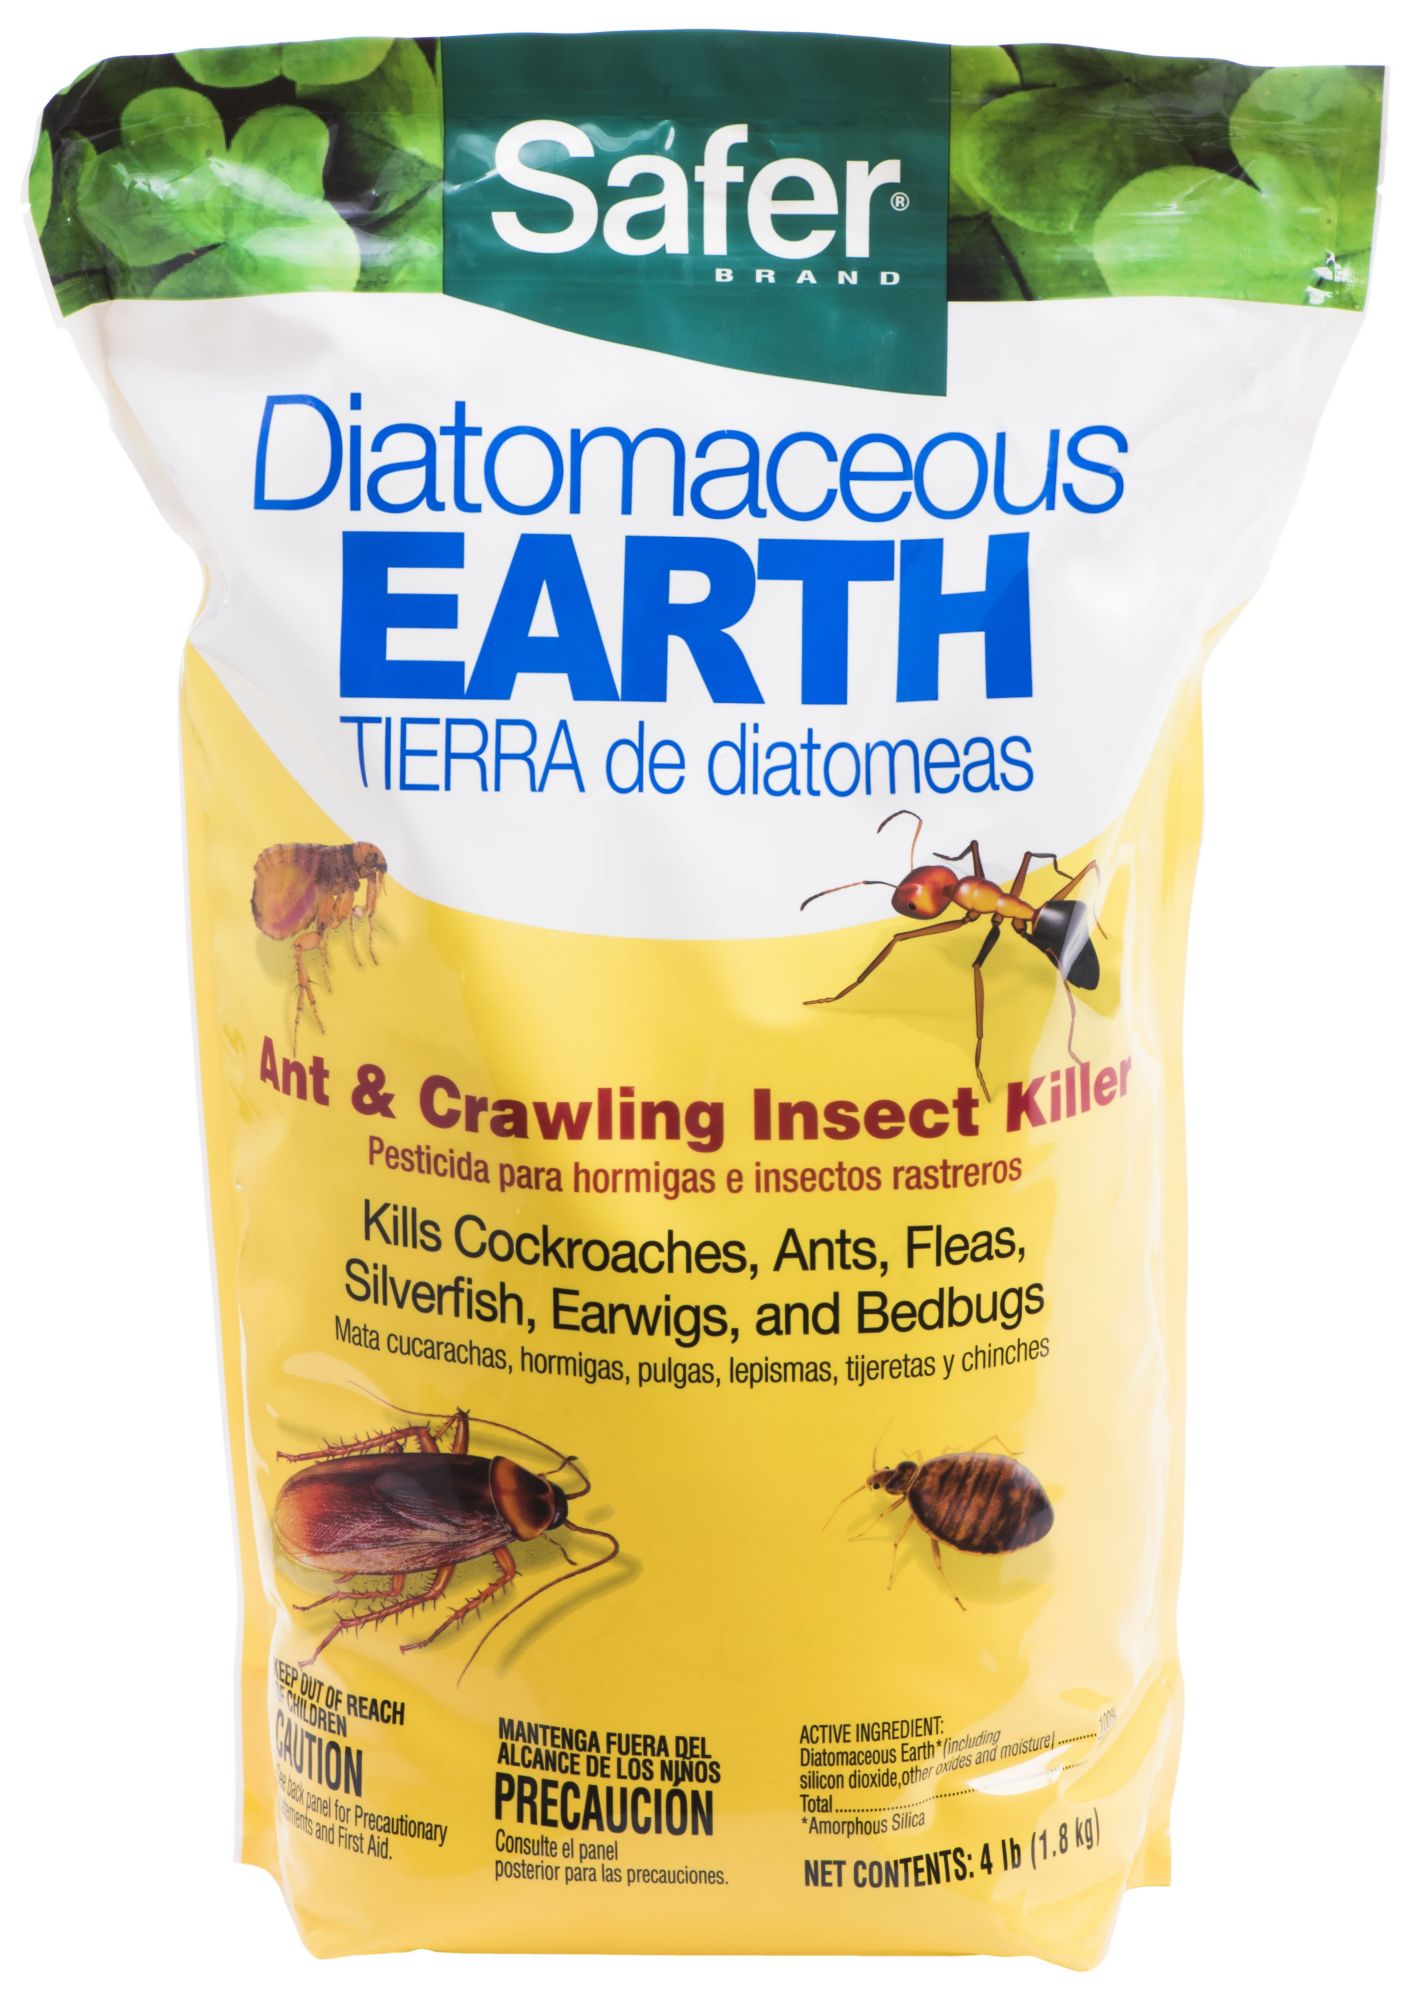 Diatomaceous Earth Bed Bugs Fleas Ants Other Crawling